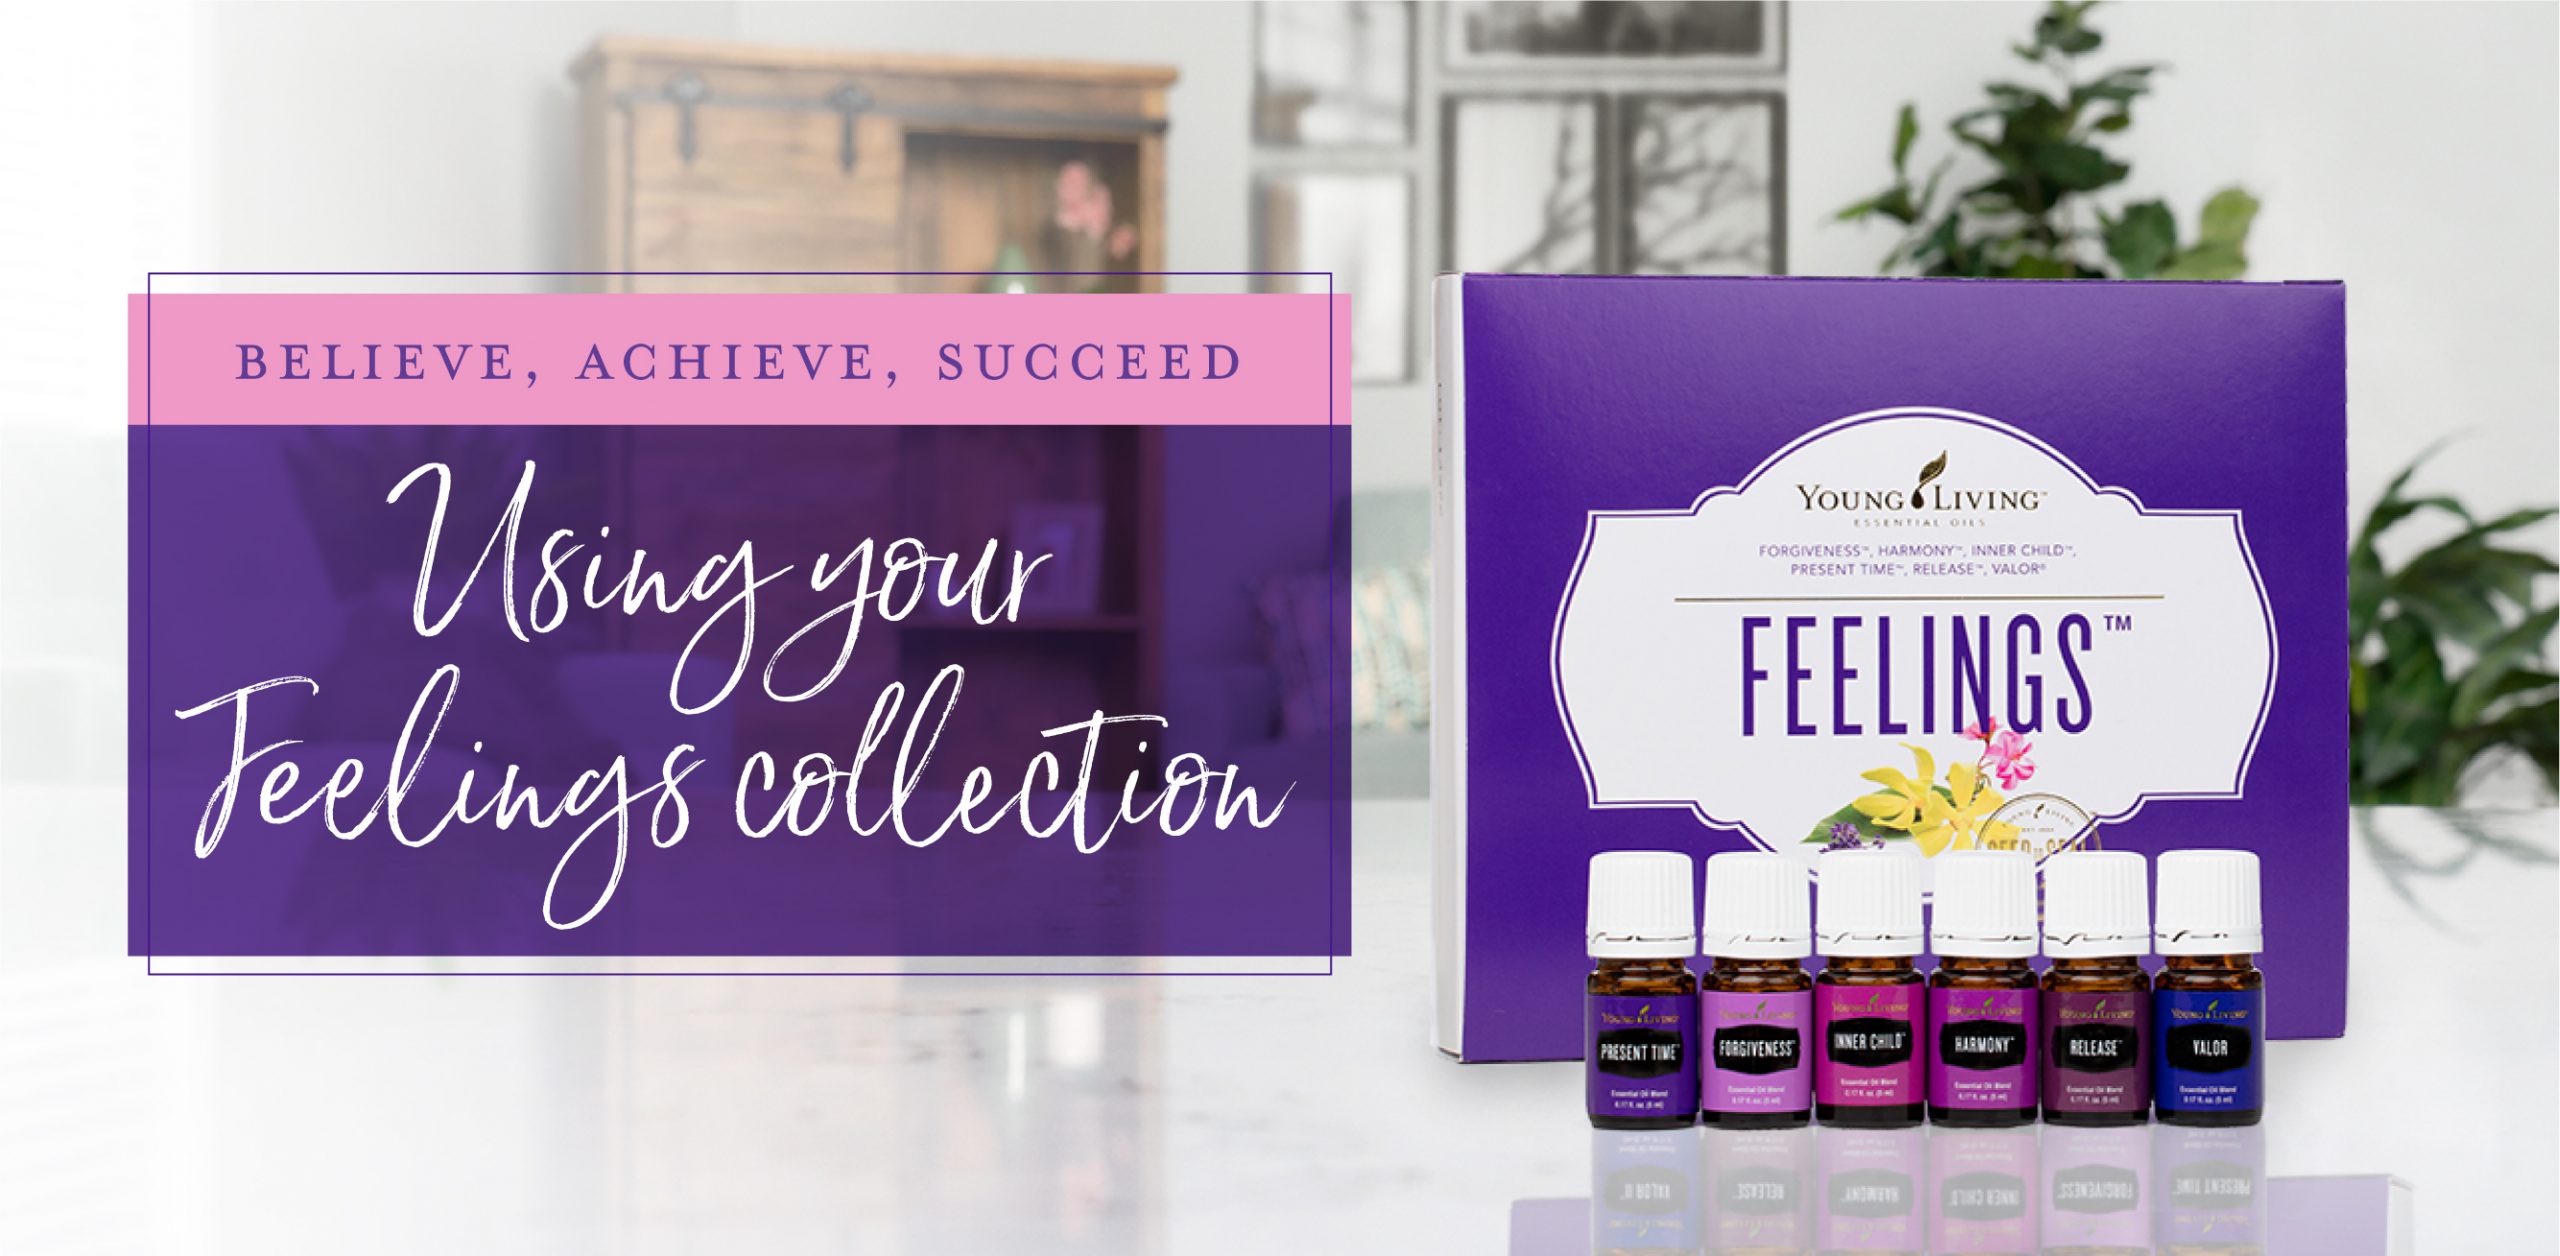 Believe, achieve, succeed with Young Living's Feelings Collection ...